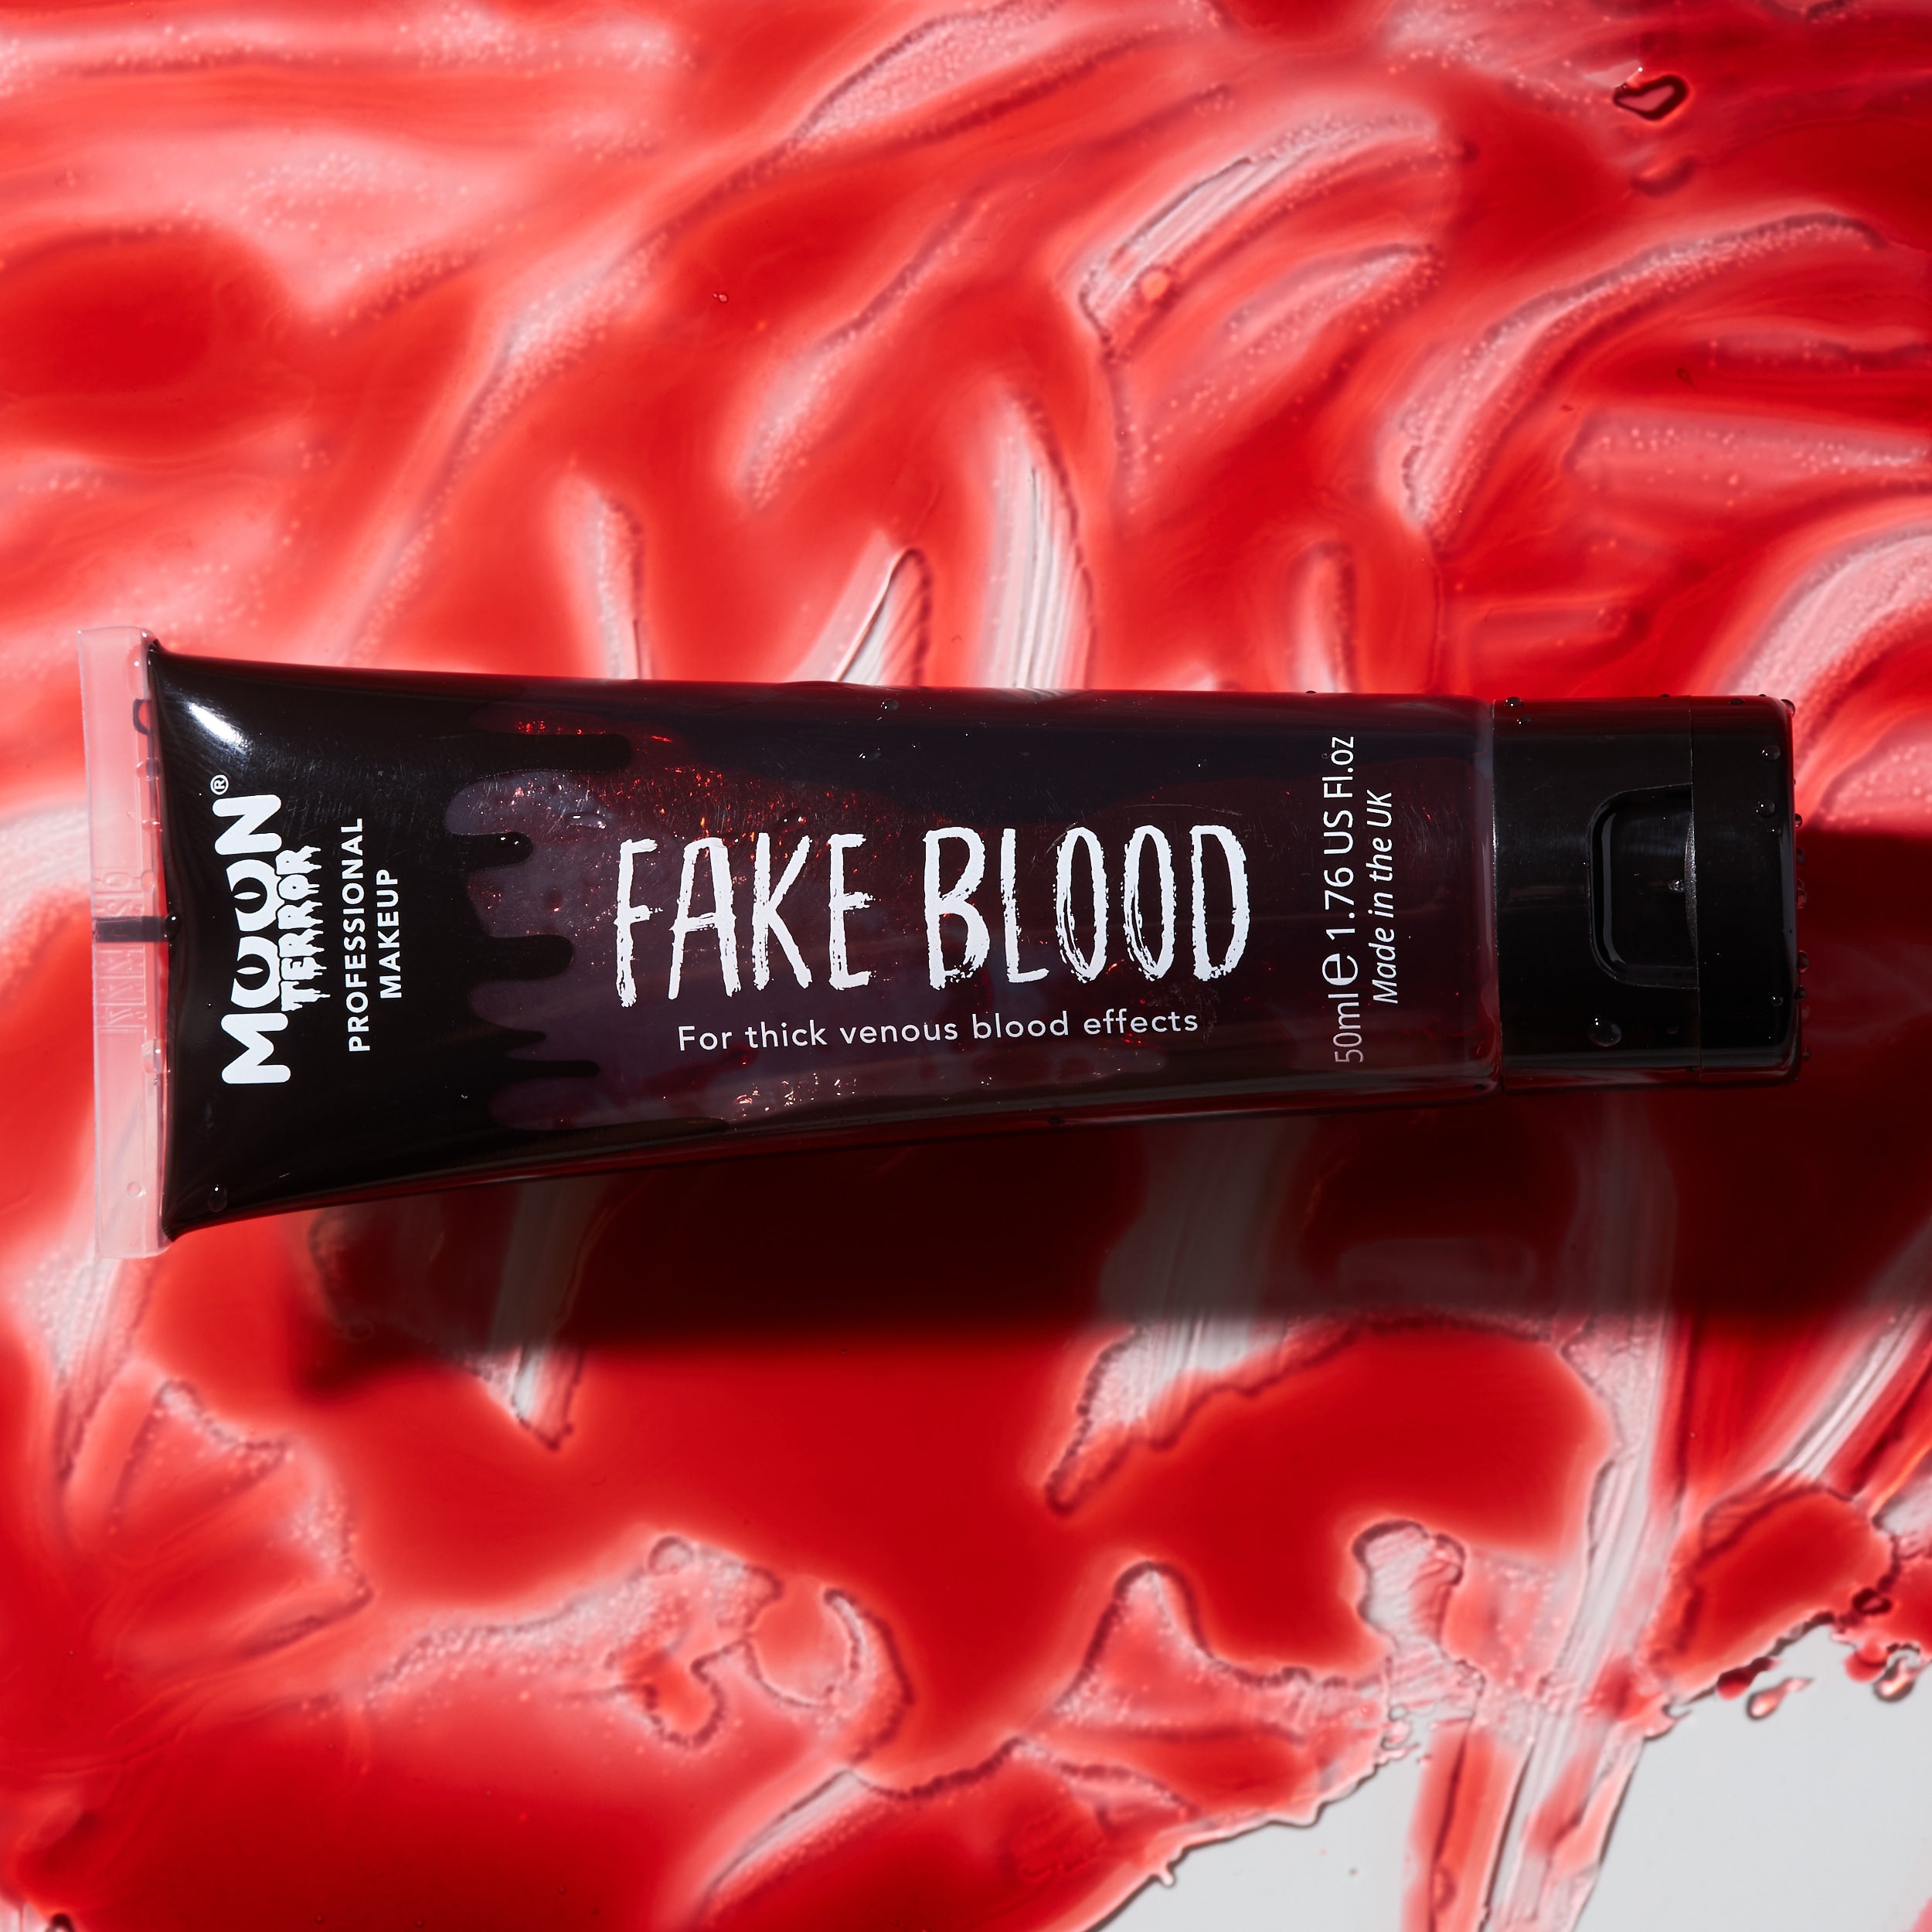 Pro FX Fake Blood, 50mL. Cosmetically certified, FDA & Health Canada compliant, cruelty free and vegan.